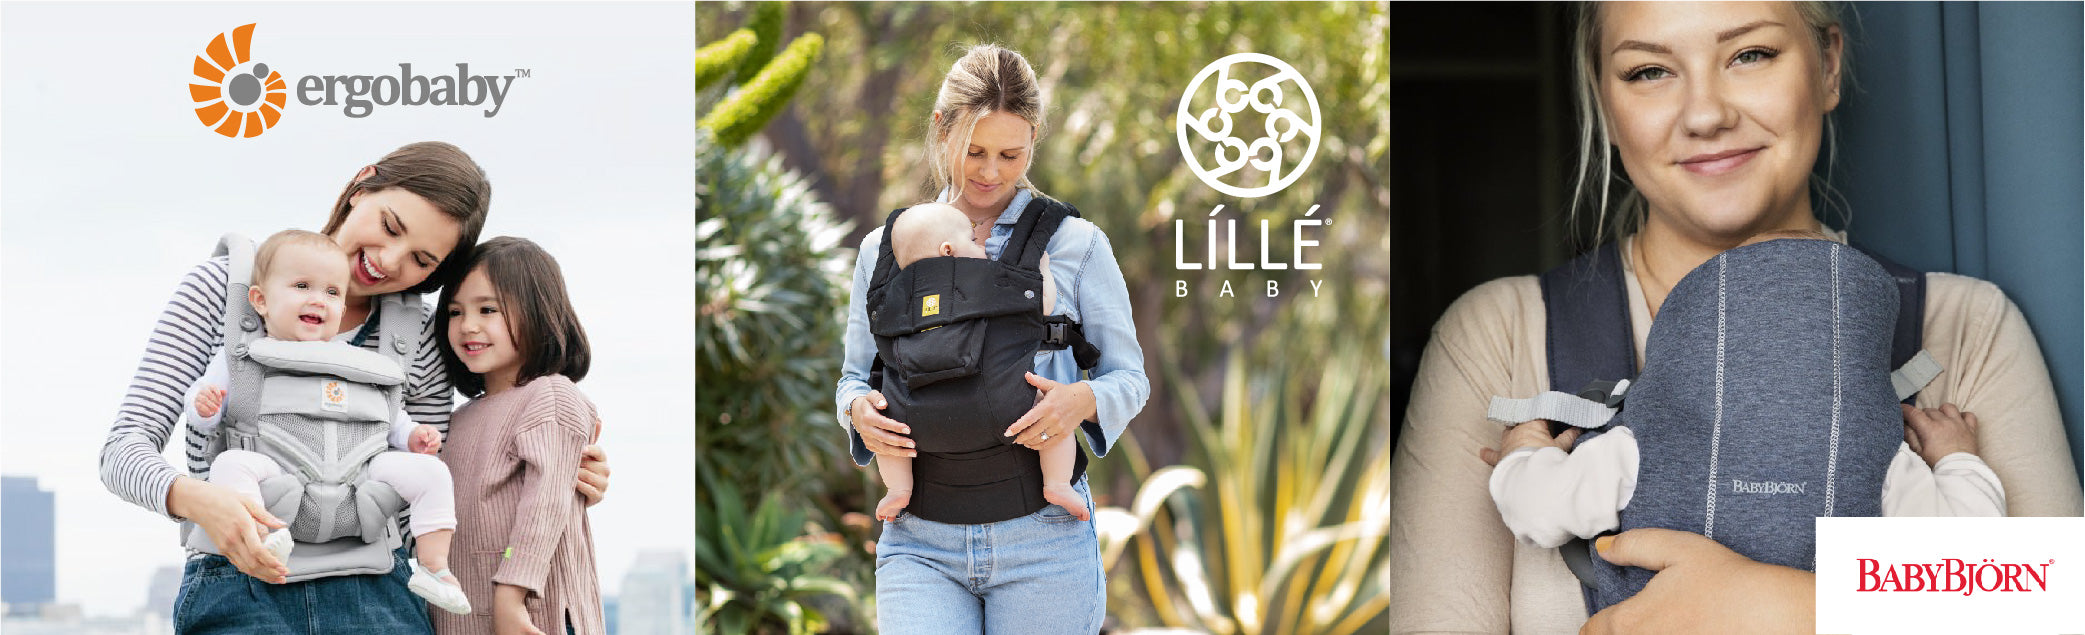 Ergobaby, LILLEbaby and Ergobaby. Leading baby carrier design.